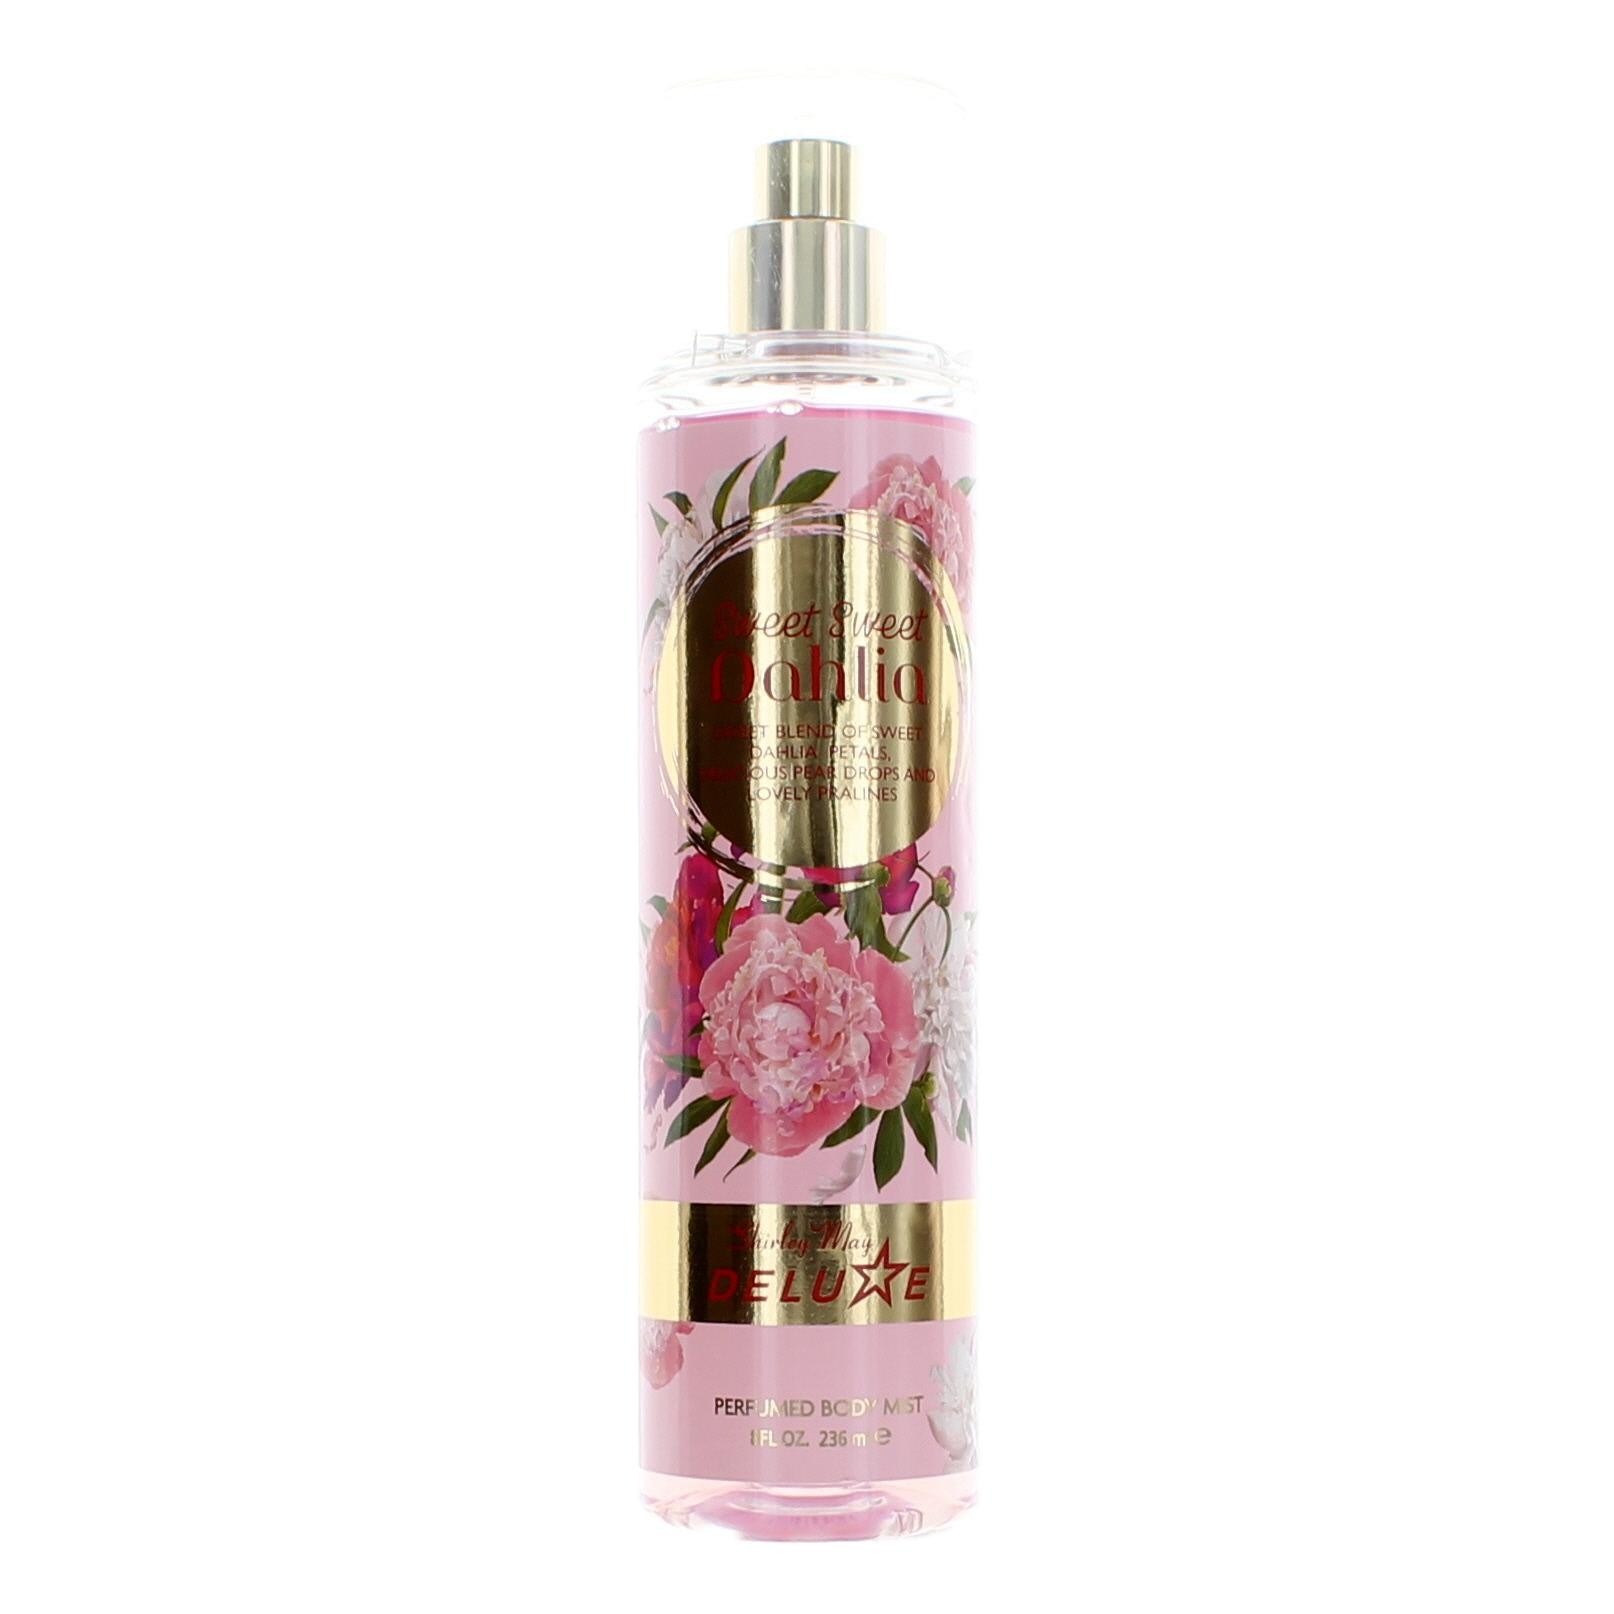 Sweet Sweet Dahlia by Shirley May Deluxe 8 oz Perfumed Body Mist for Women